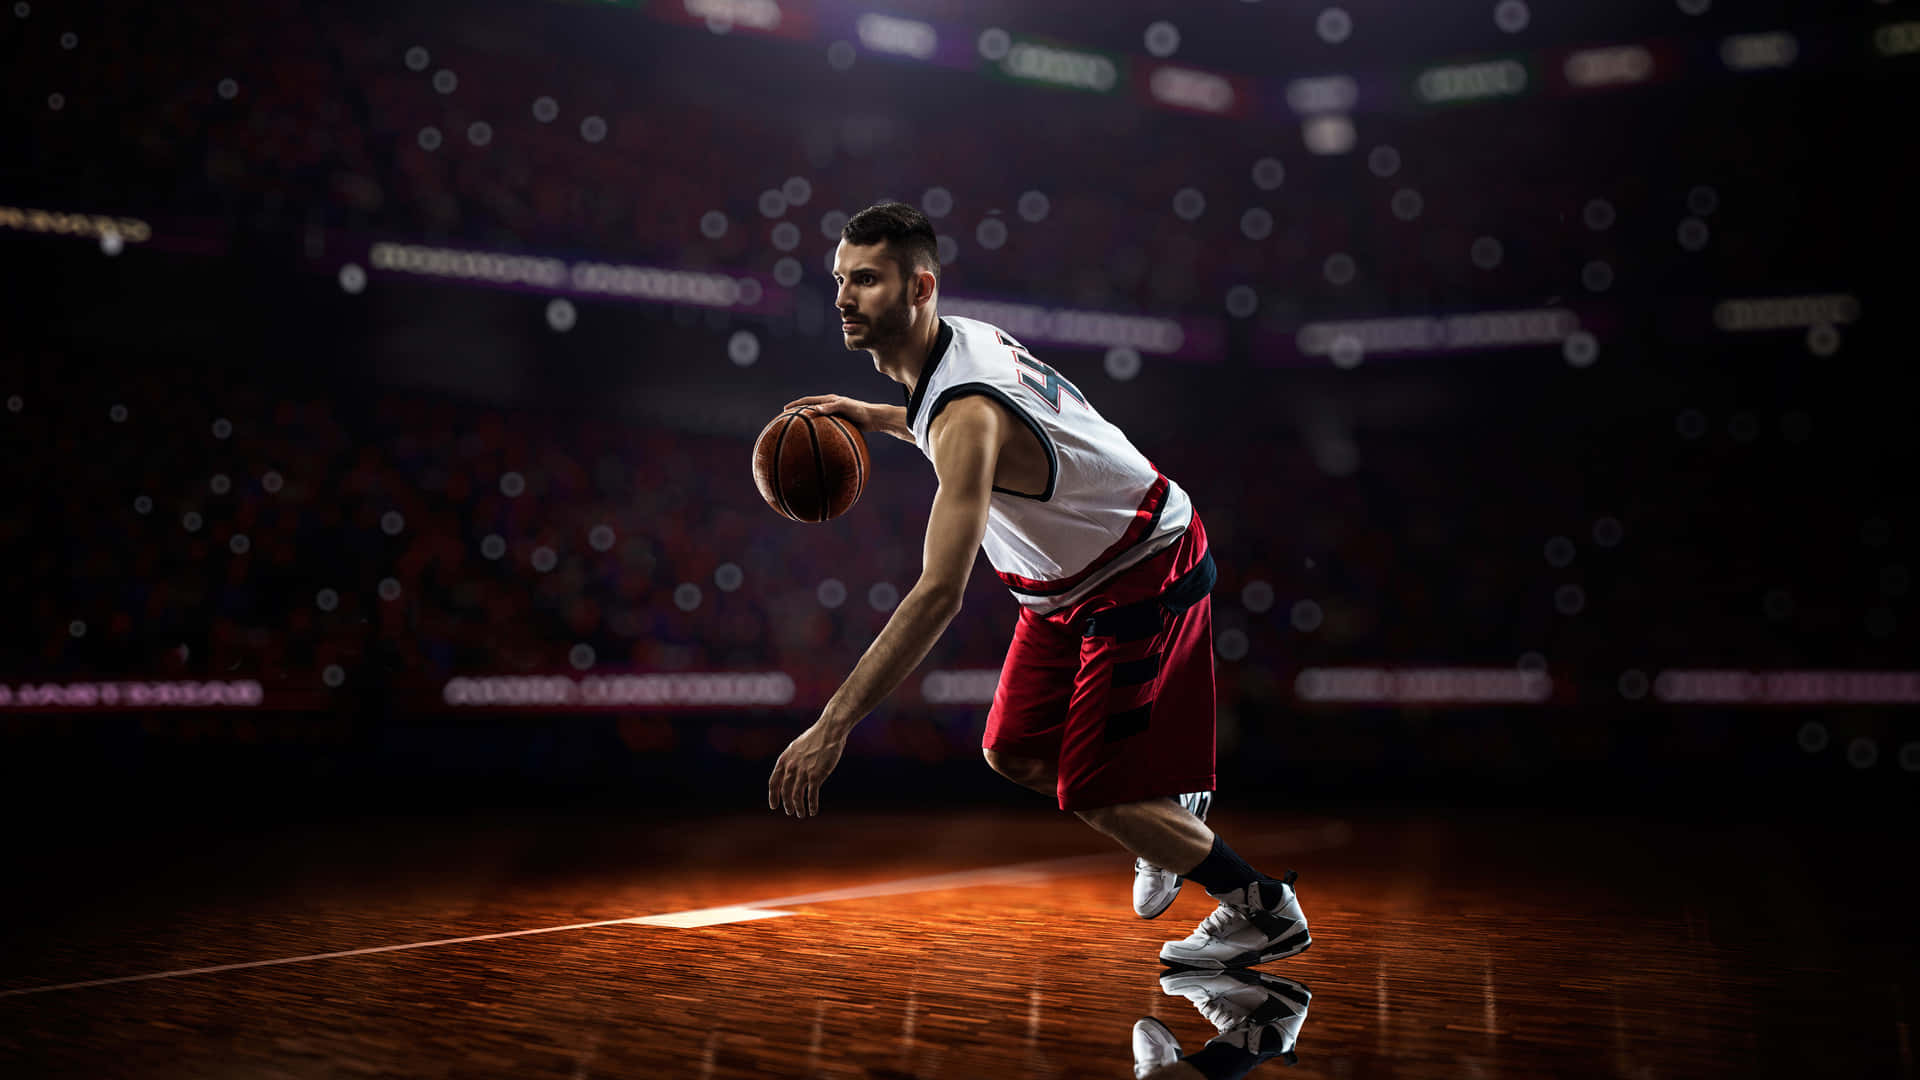 Take Your Basketball Skills to the Next Level in 1080p!